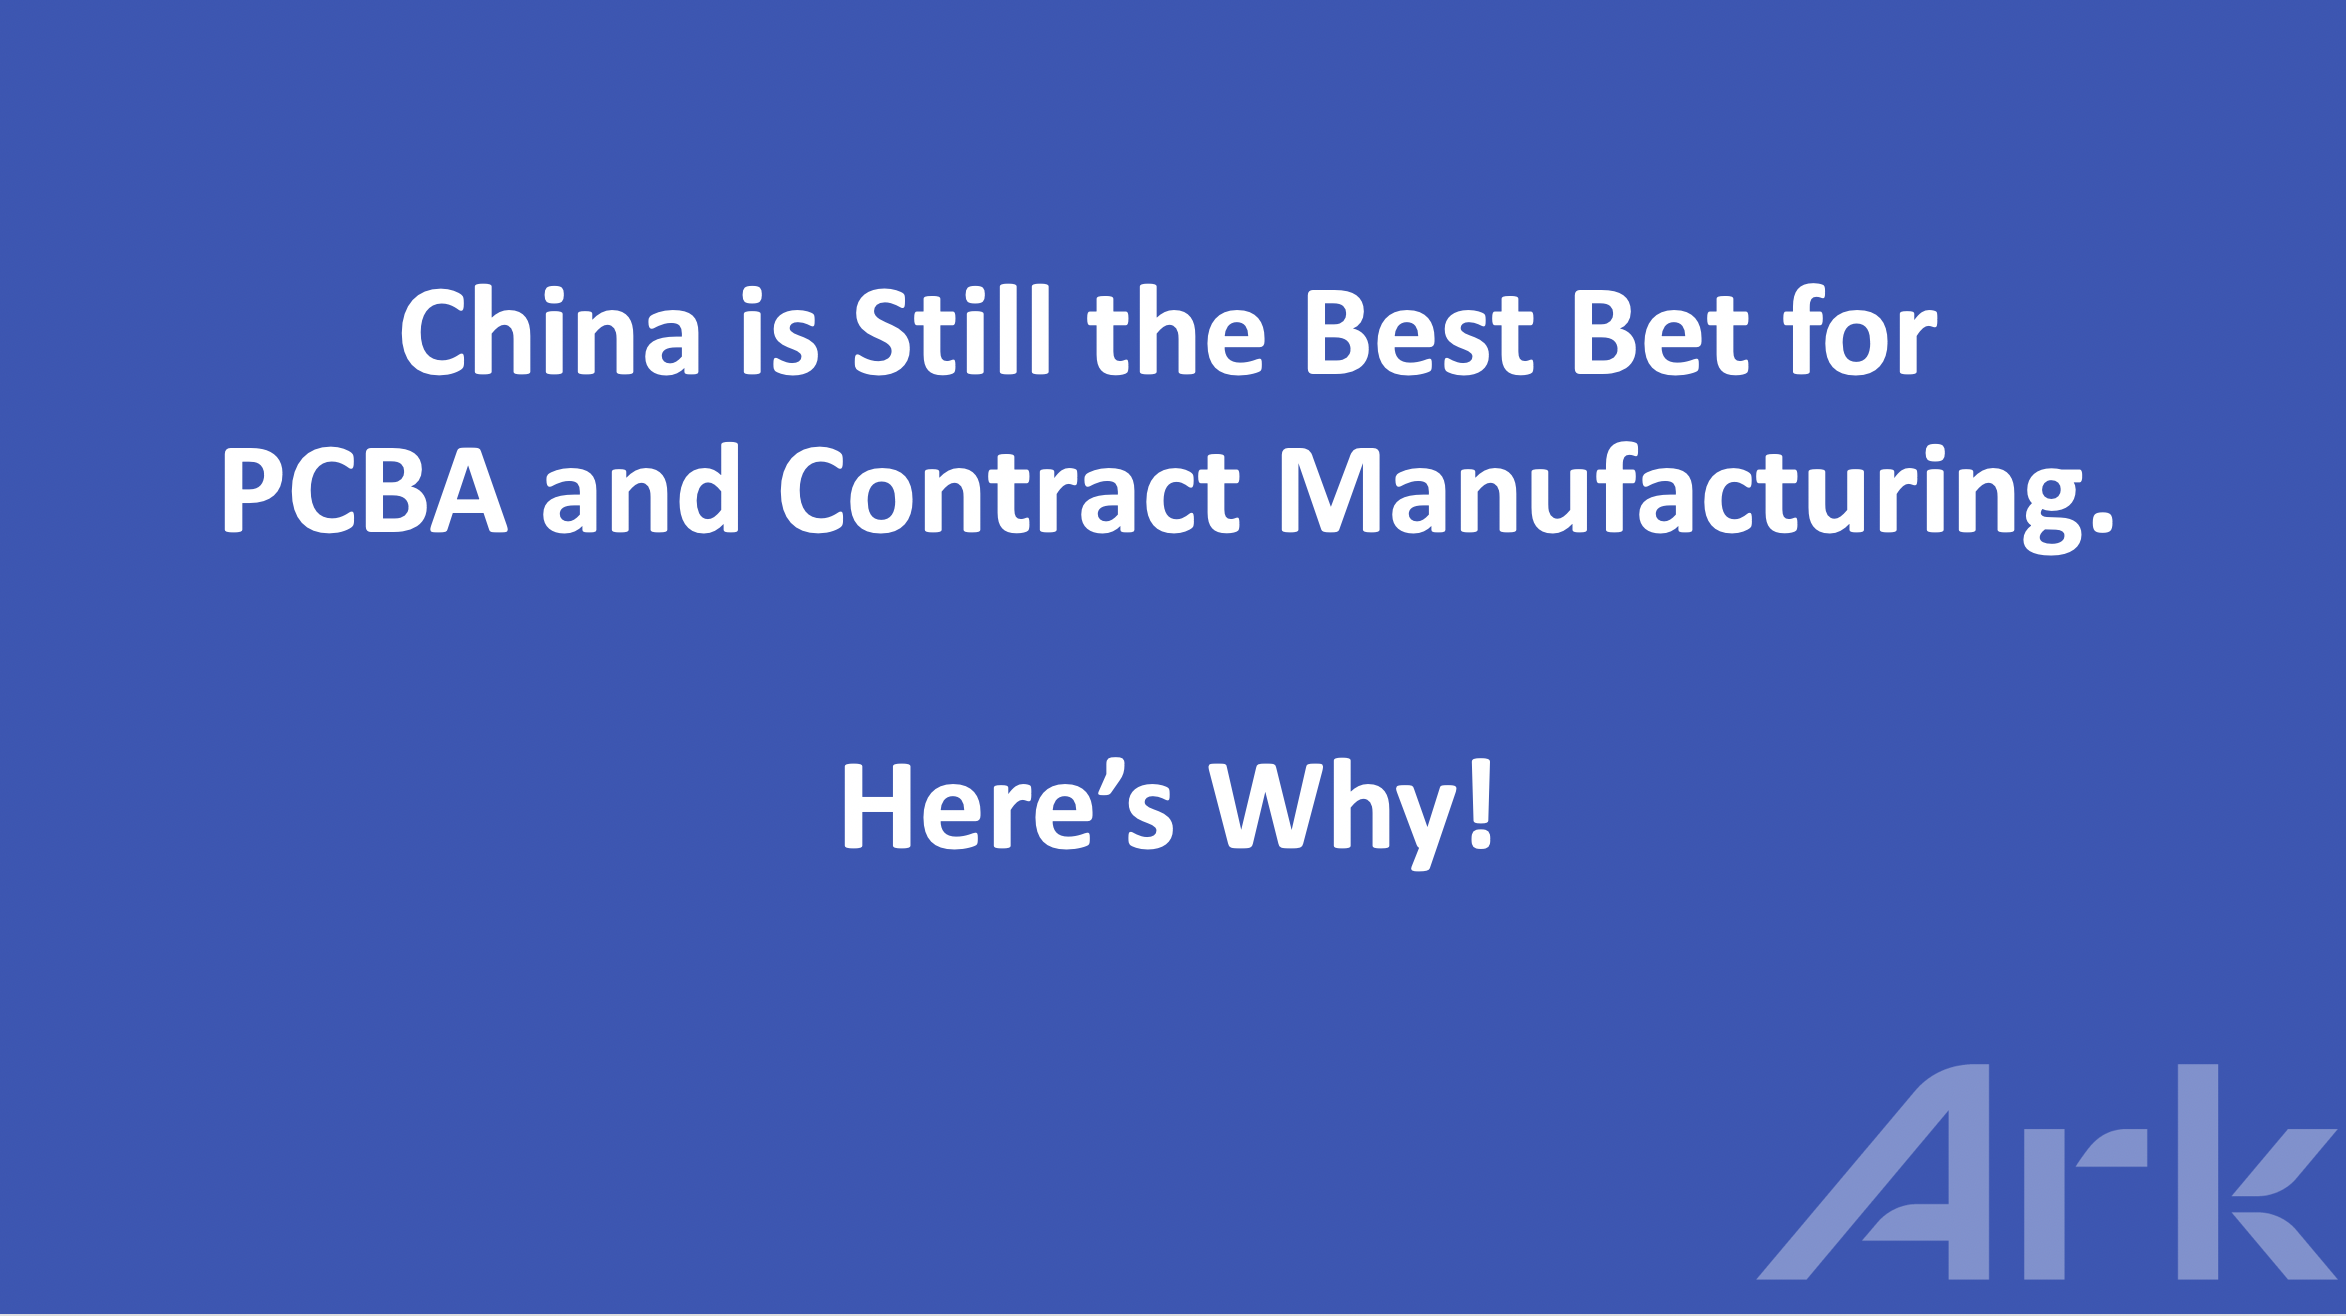 Why China for PCBA